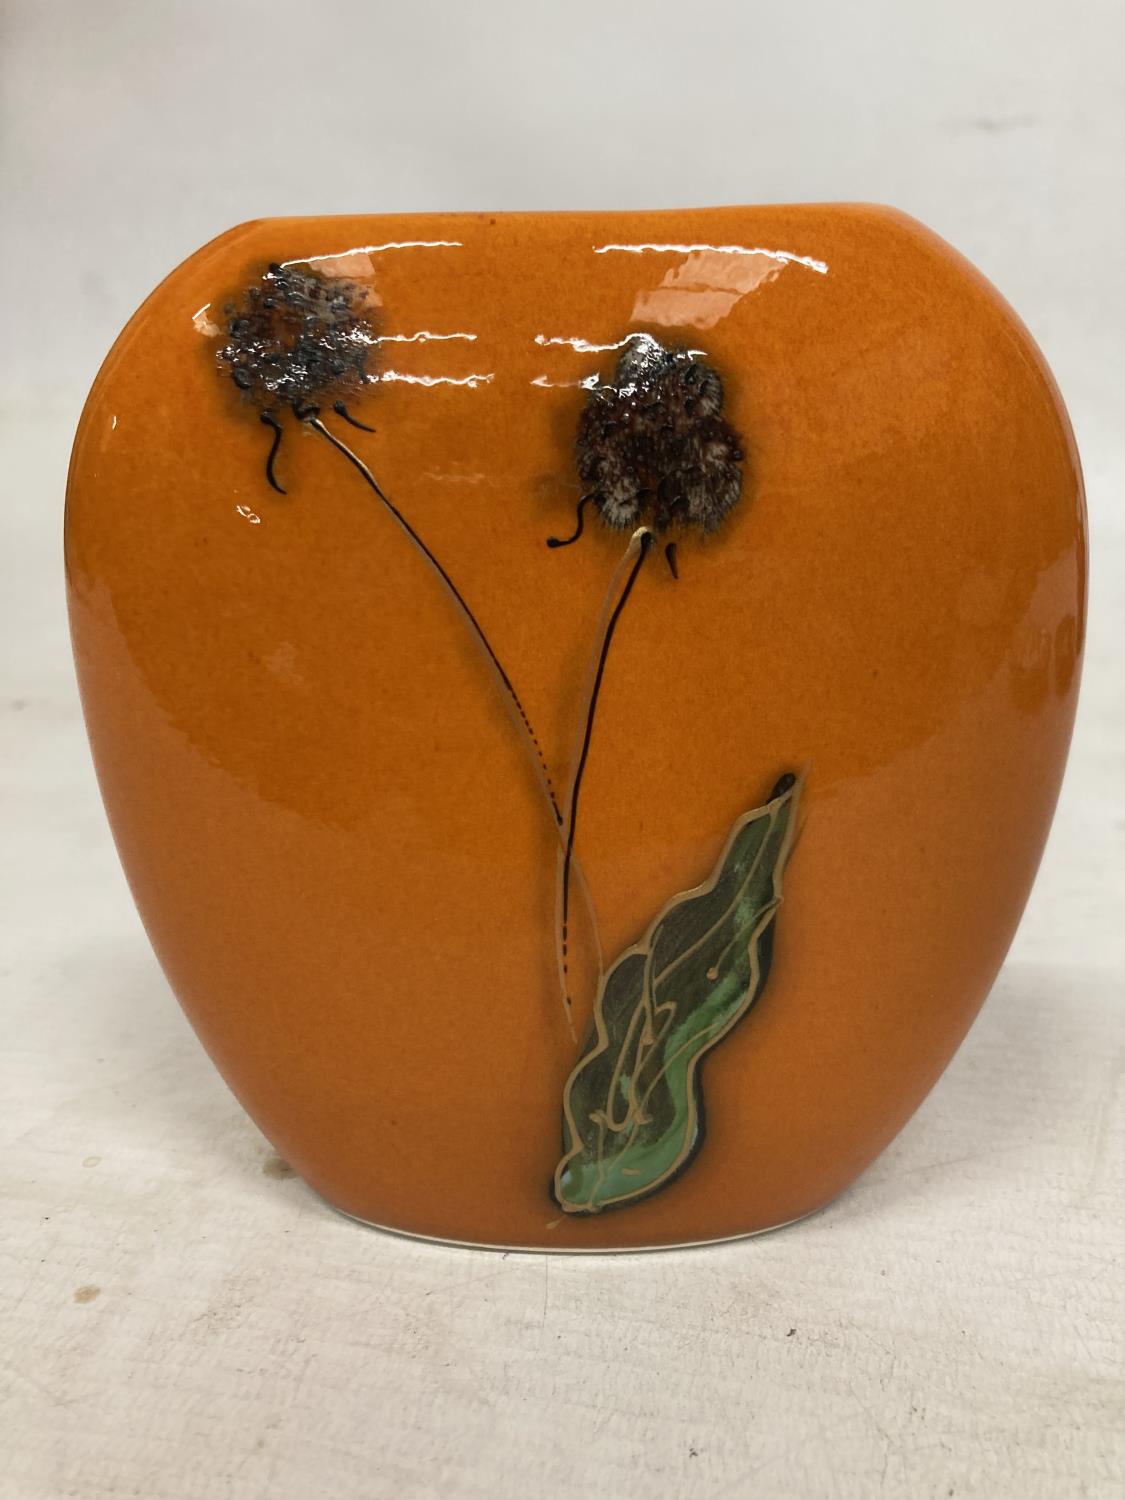 AN ANITA HARRIS HAND PAINTED AND SIGNED IN GOLD GRAPE VINE VASE - Image 3 of 6